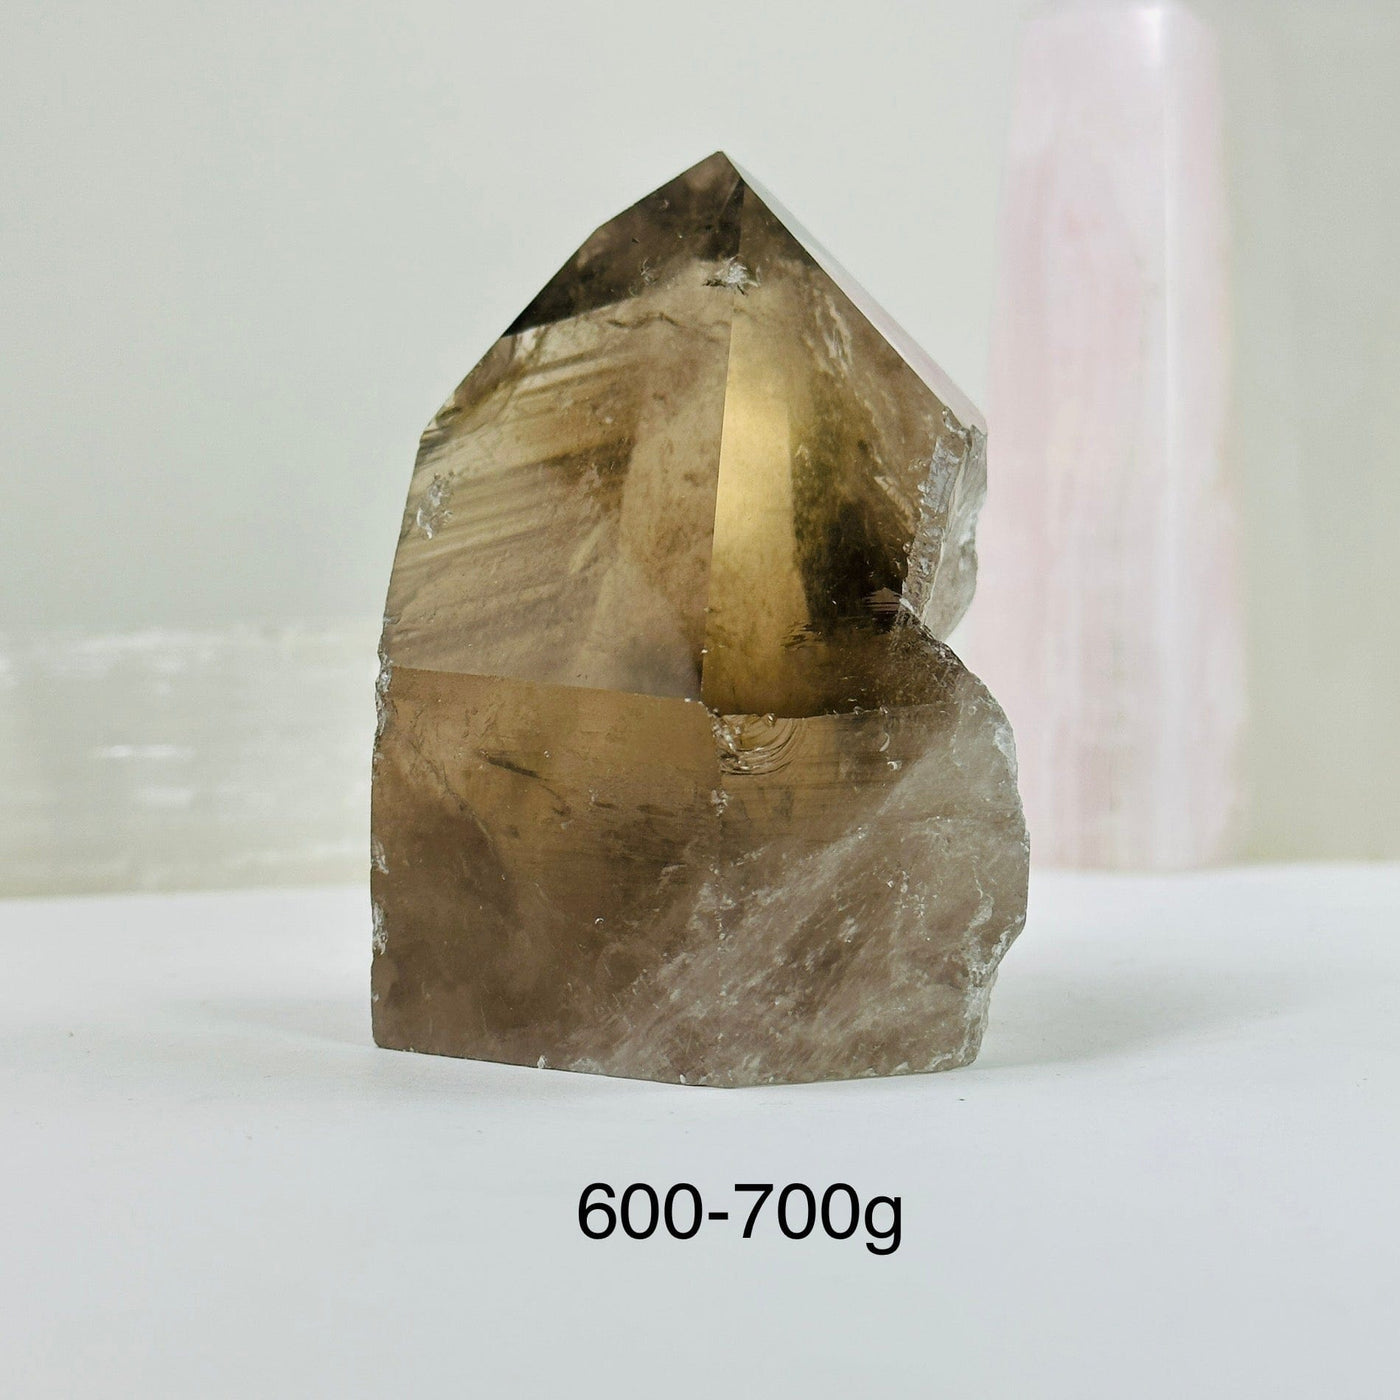 600-700g smoky quartz semi polished point with decorations in the background